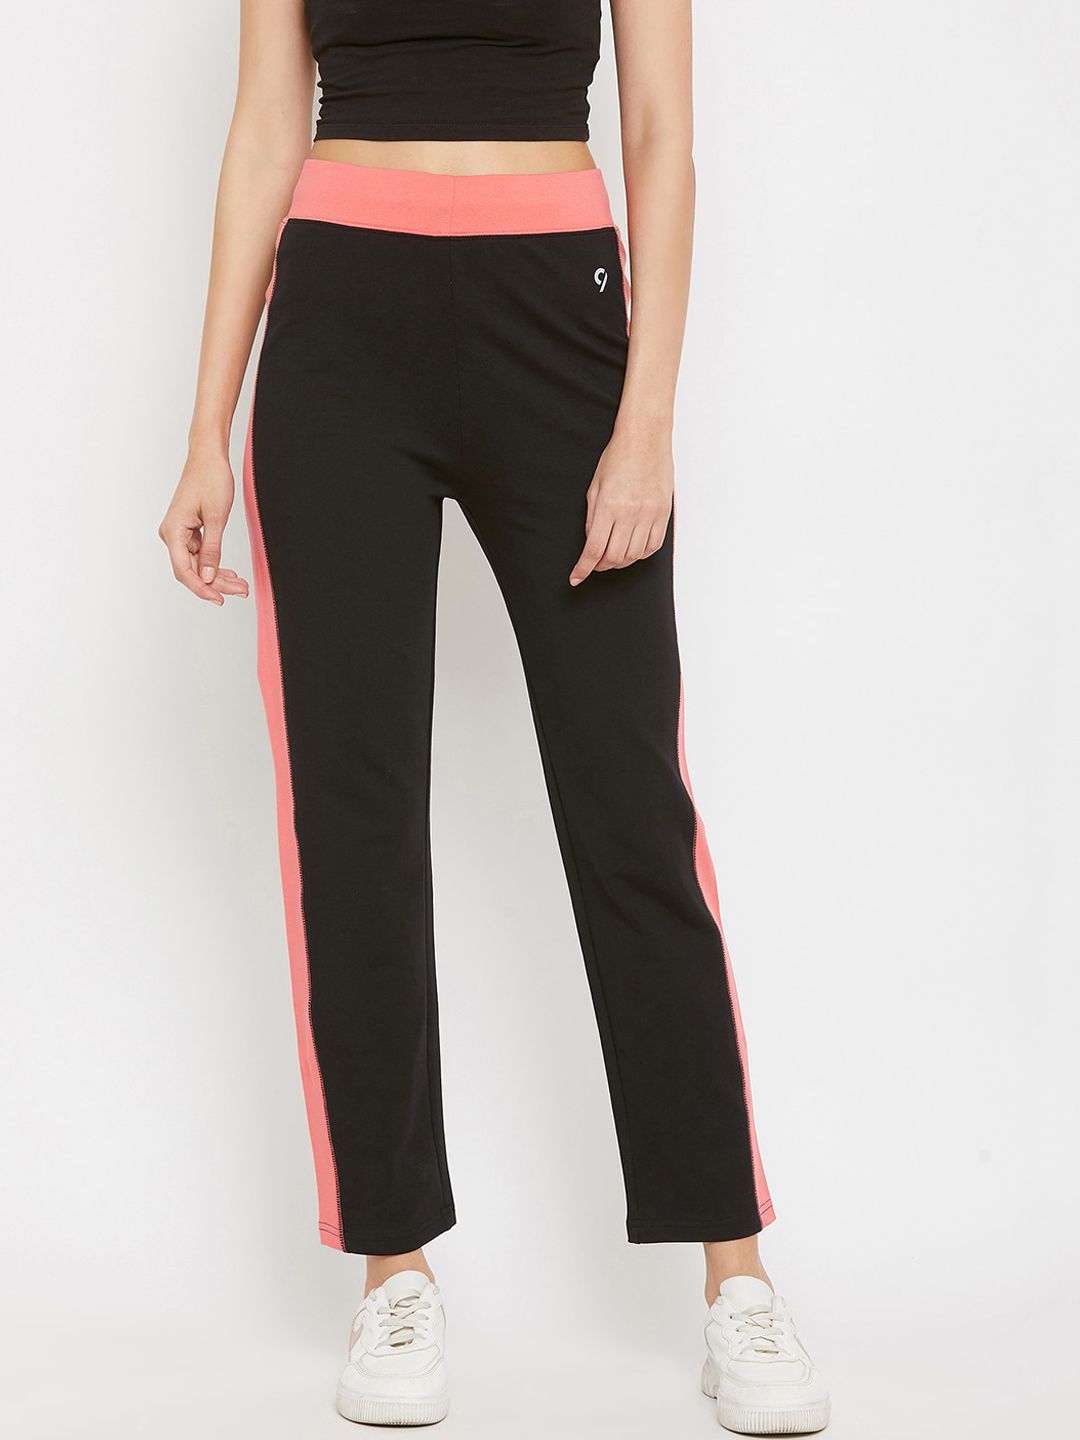 C9 AIRWEAR Women Black & Pink Colourblocked Track Pants Price in India